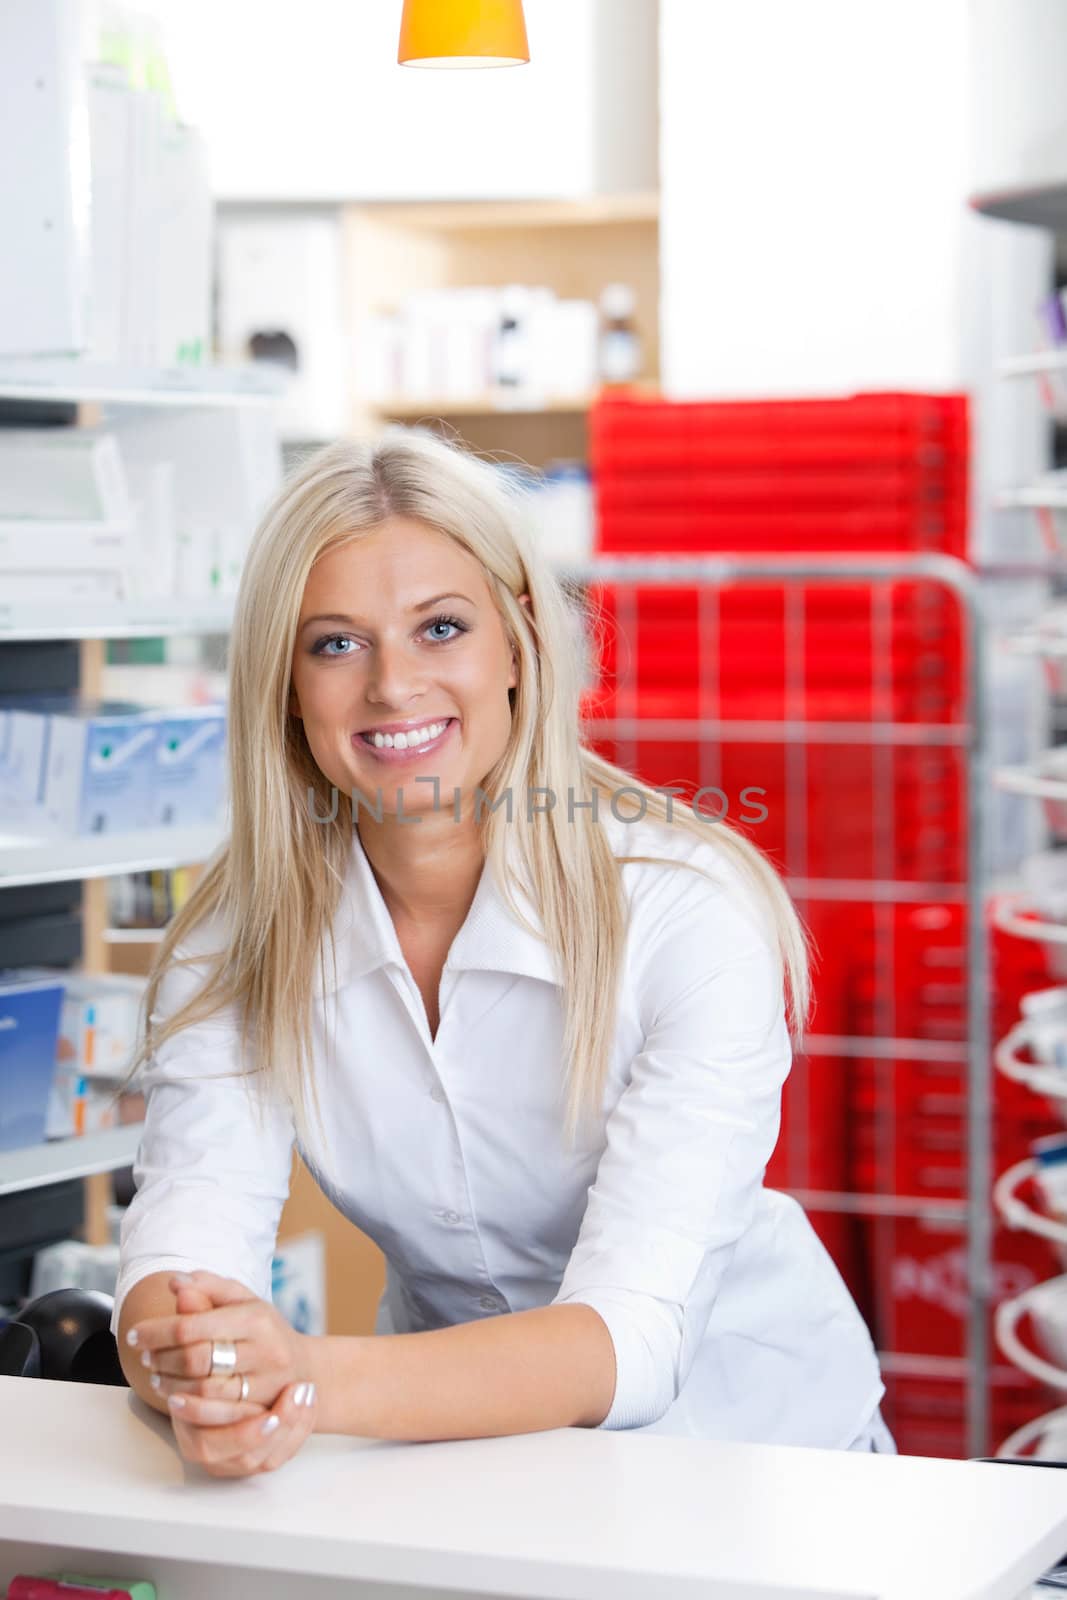 Smiling Female Chemist at Counter by leaf